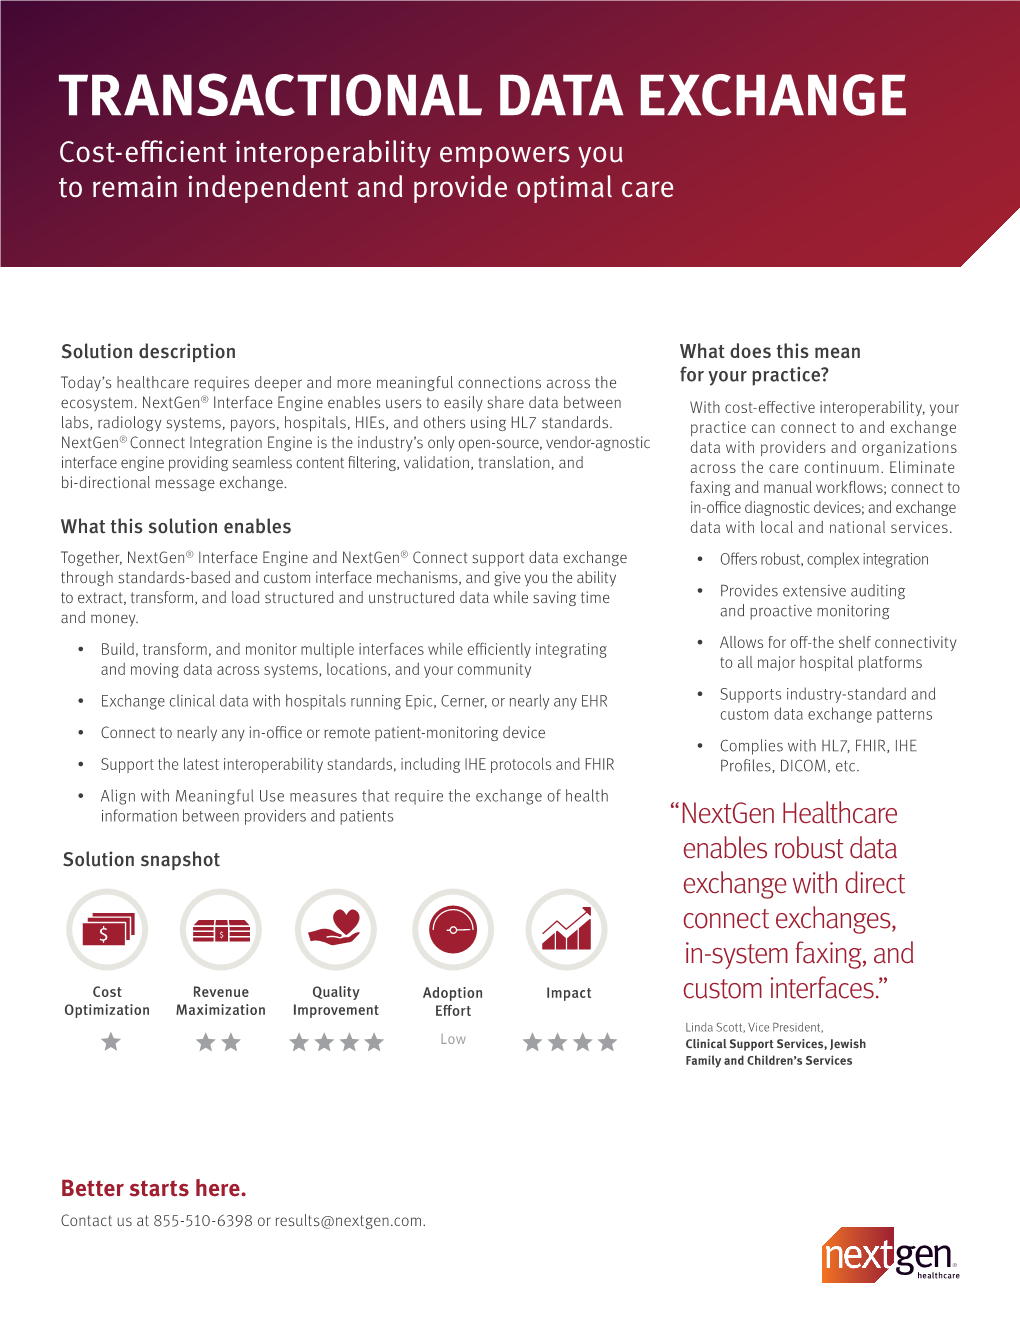 TRANSACTIONAL DATA EXCHANGE Cost-Efficient Interoperability Empowers You to Remain Independent and Provide Optimal Care